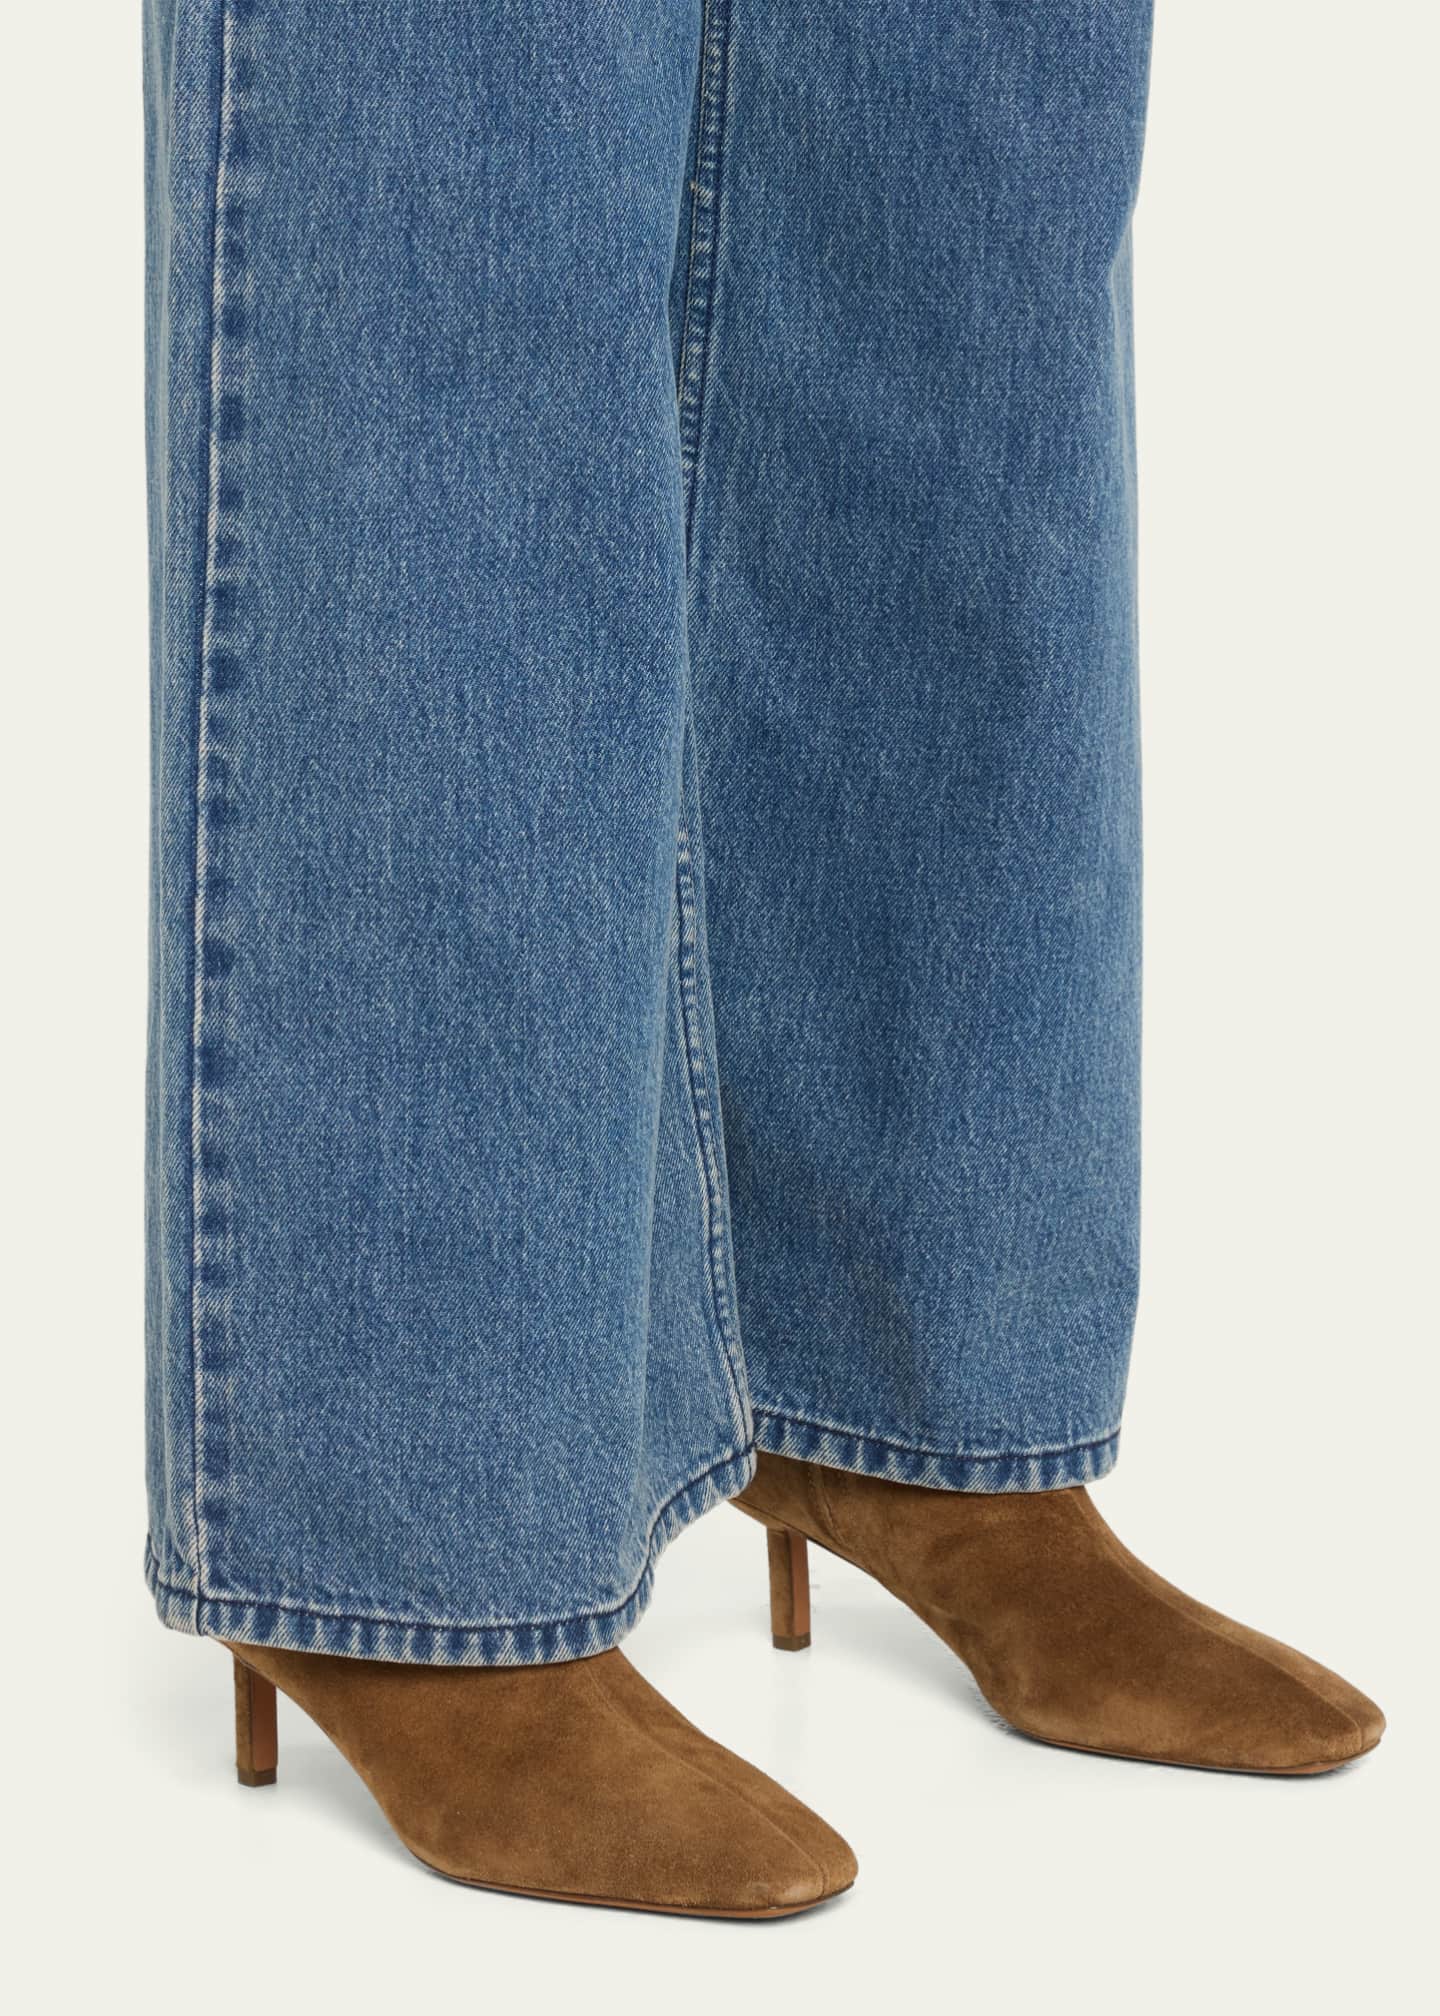 3.1 Phillip Lim Nell Suede Ankle Booties - Bergdorf Goodman